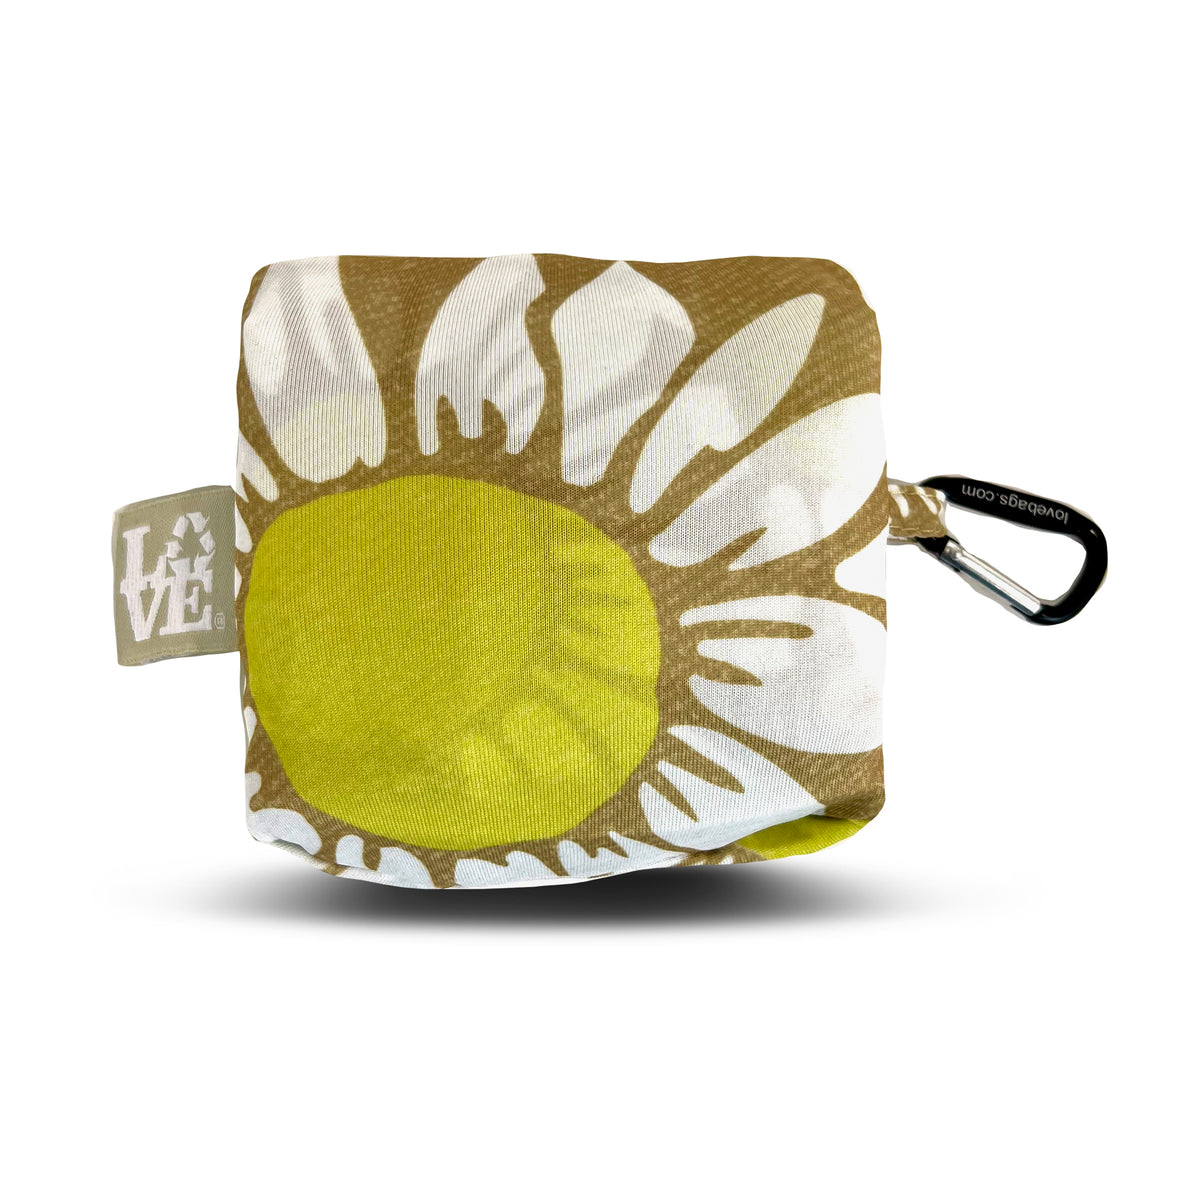 CROSSBODY STASH IT Tote Bag  -  SUNFLOWERS (WITH EXTRA LONG STRAP)